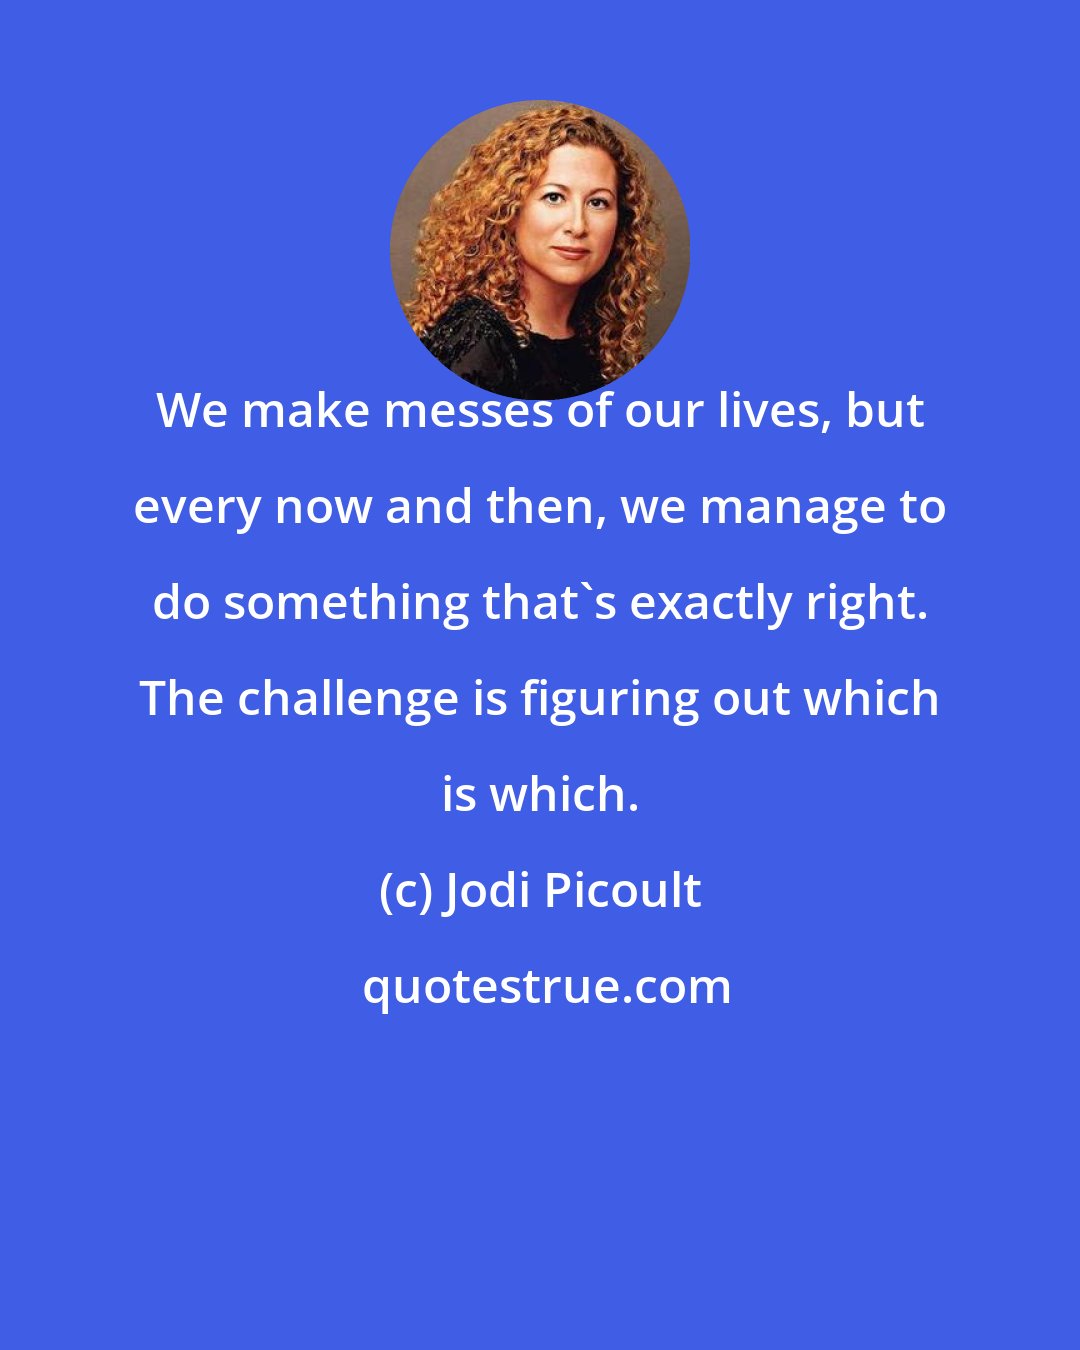 Jodi Picoult: We make messes of our lives, but every now and then, we manage to do something that's exactly right. The challenge is figuring out which is which.